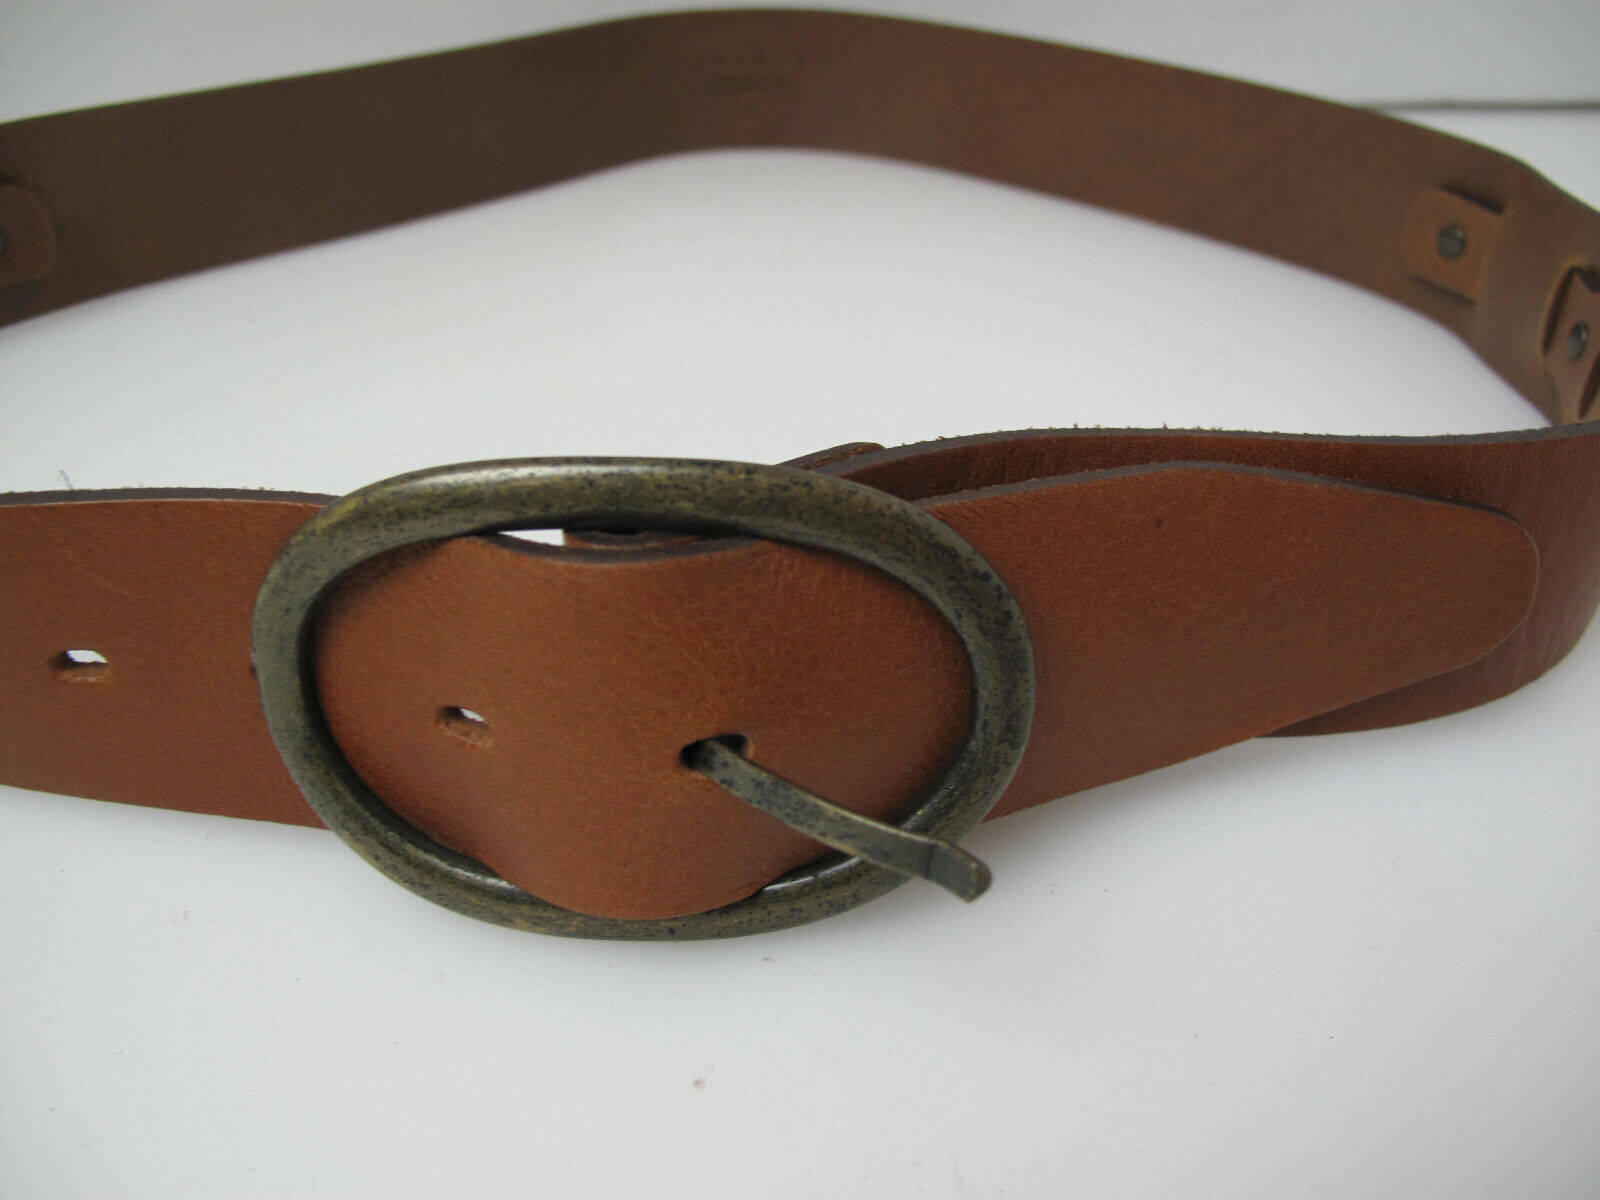 Theory Brown Leather Belt Womens Handmade in Ital… - image 2